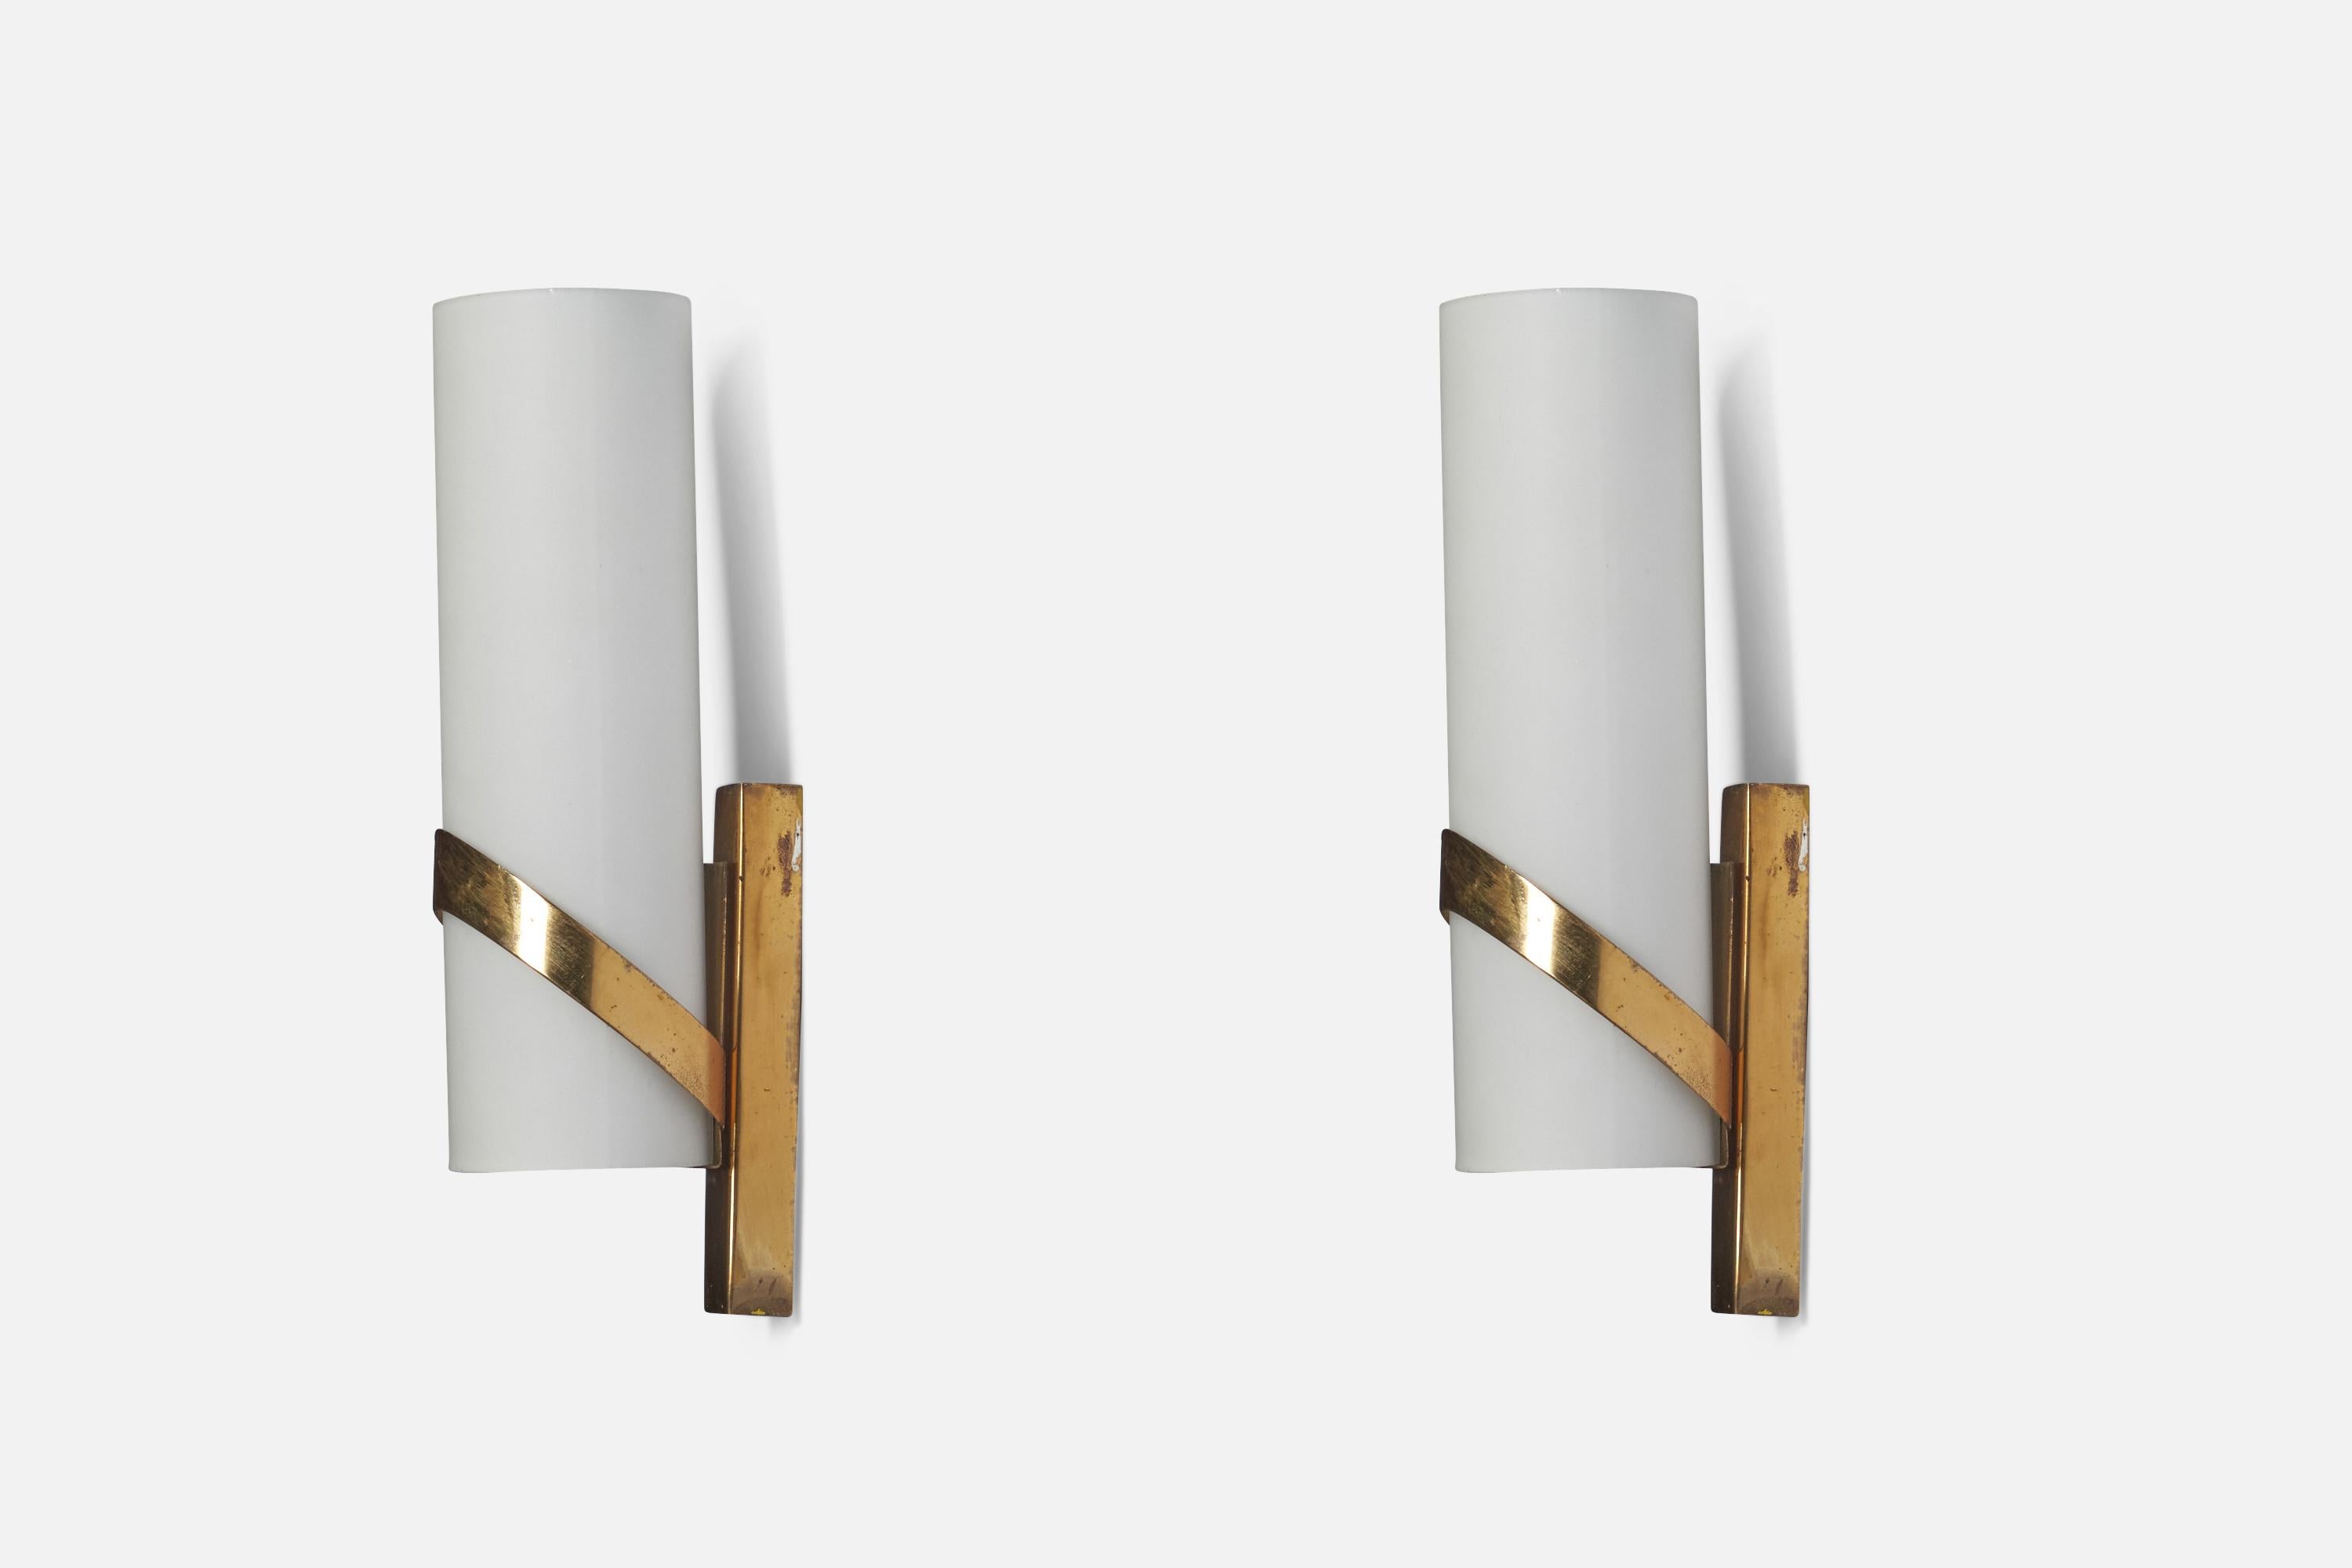 A pair of glass and brass wall lights designed and produced by Fontana Arte, Italy, 1950s.

Overall Dimensions: 9.25